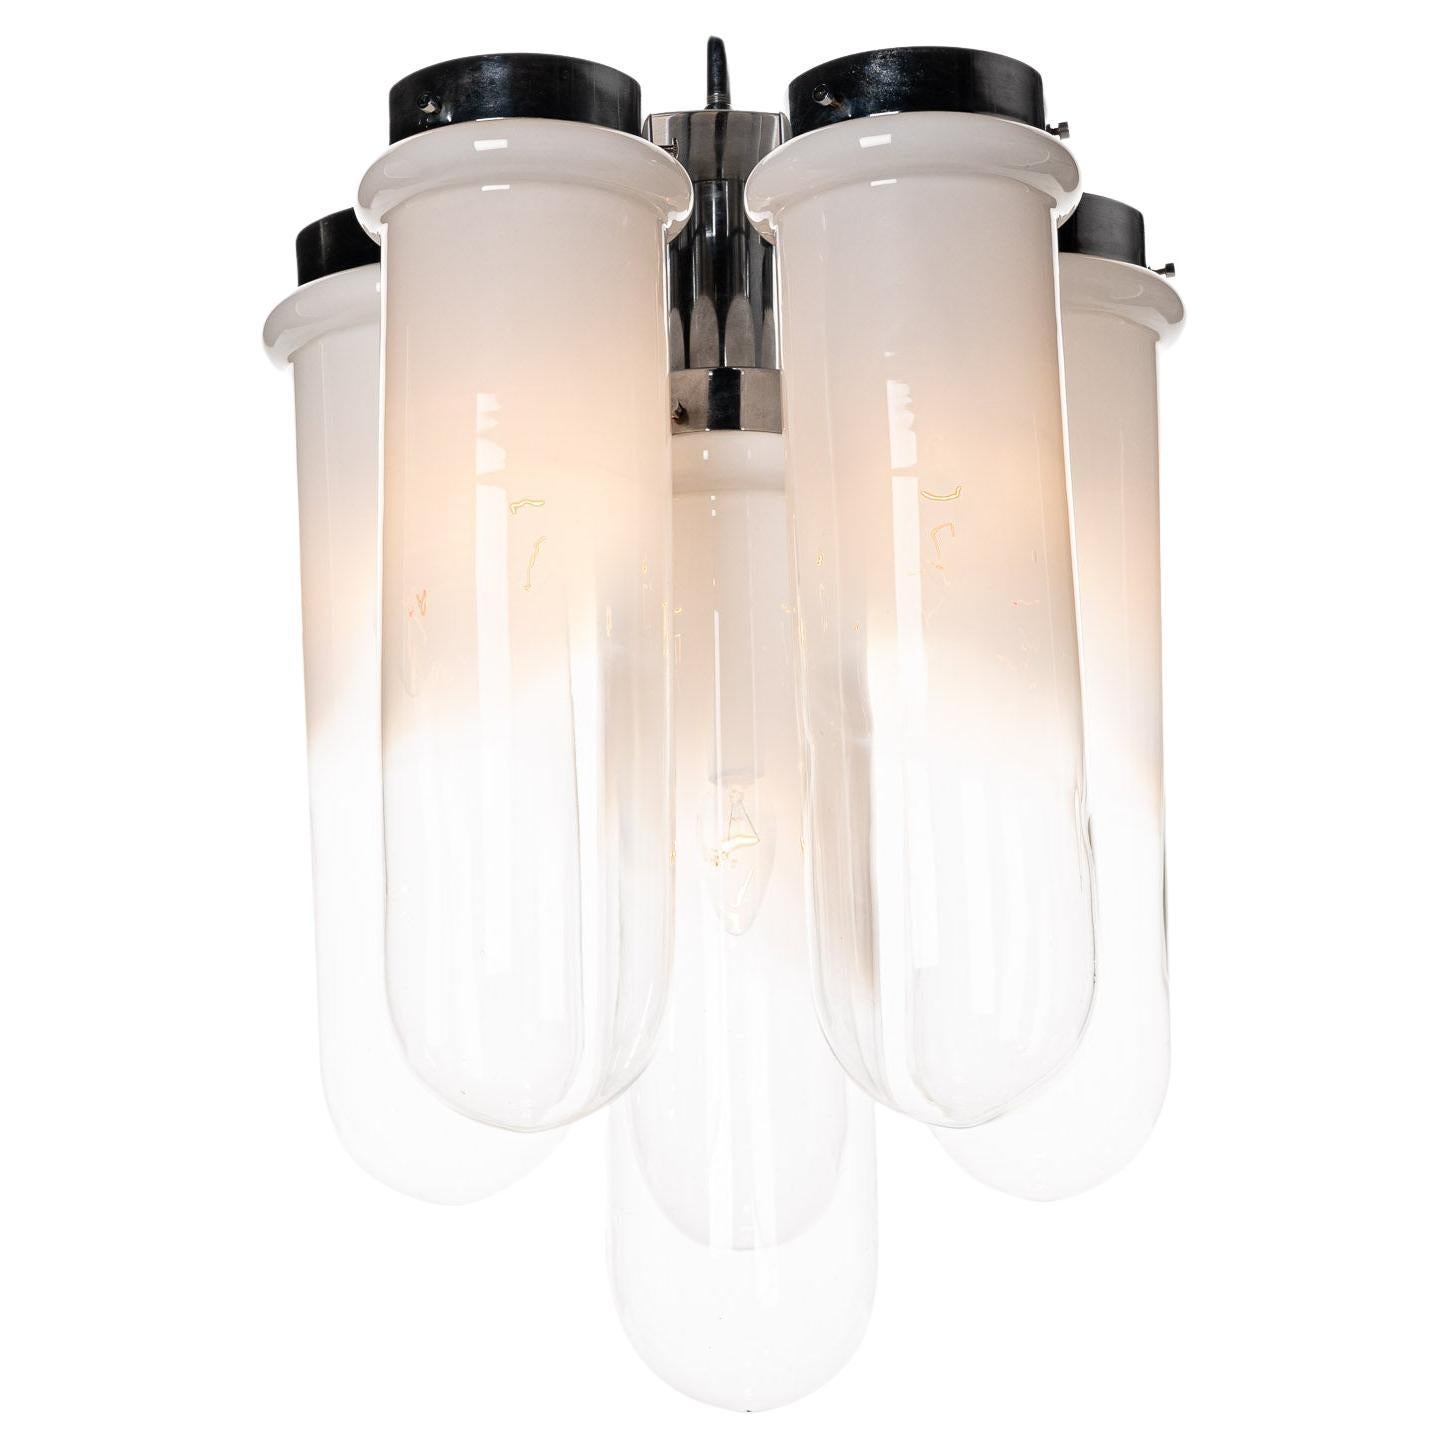 Six stunning smokey glass to clear glass tubes hanging from a chrome base. Six E14 lightbulbs. We have five matching wall lights in stock with on each one a similar glass tube.